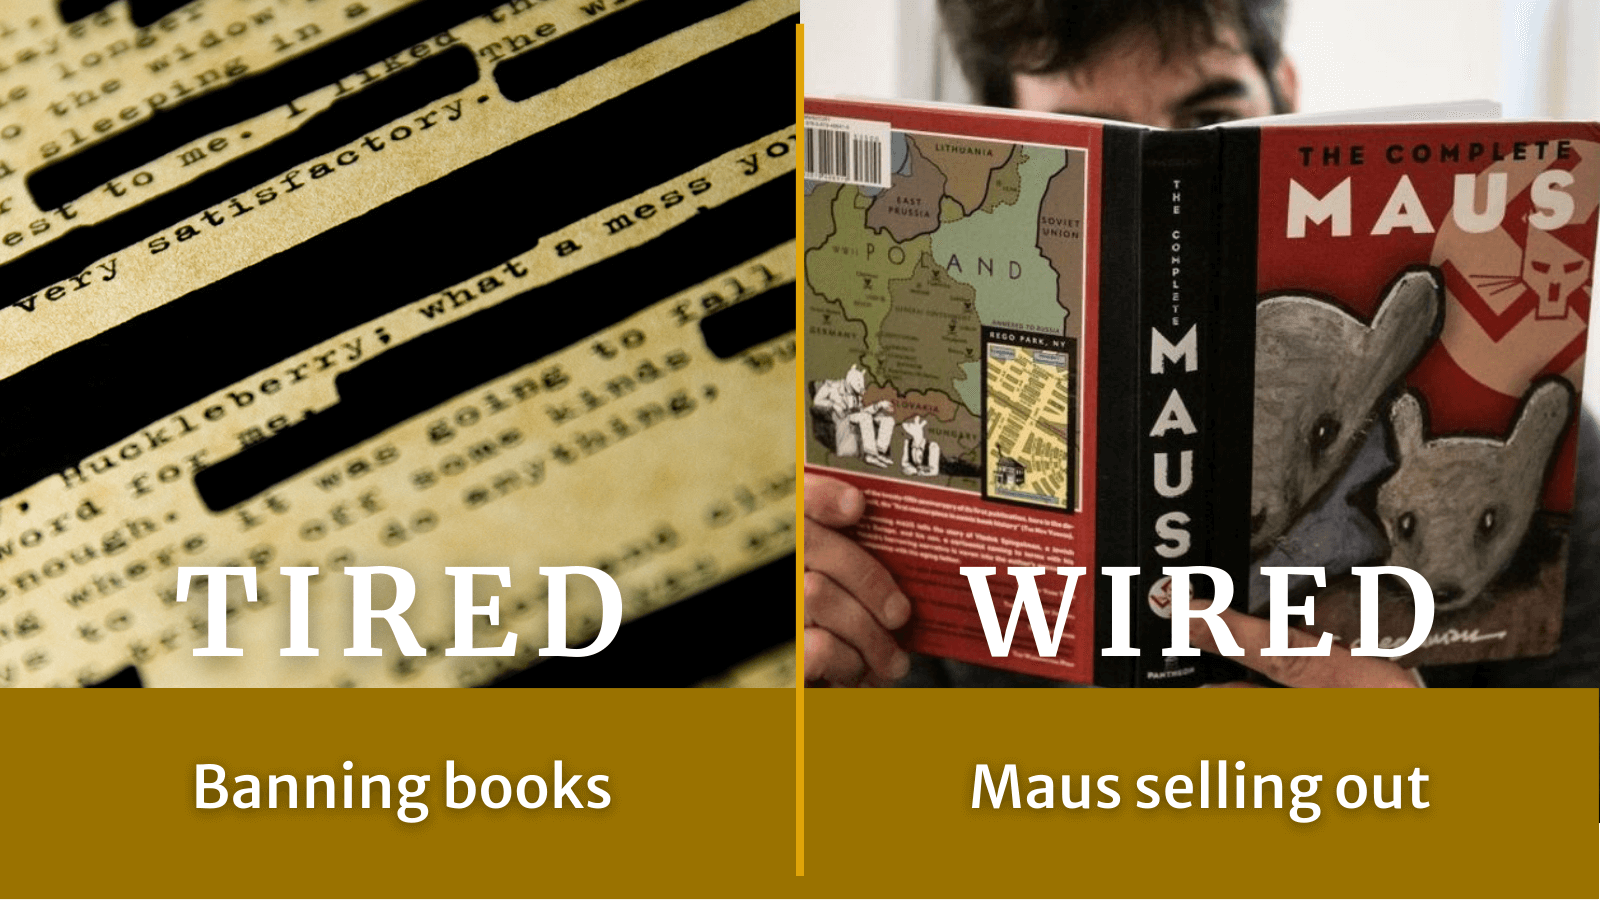 Tired: Banning books. Wired: Maus selling out.